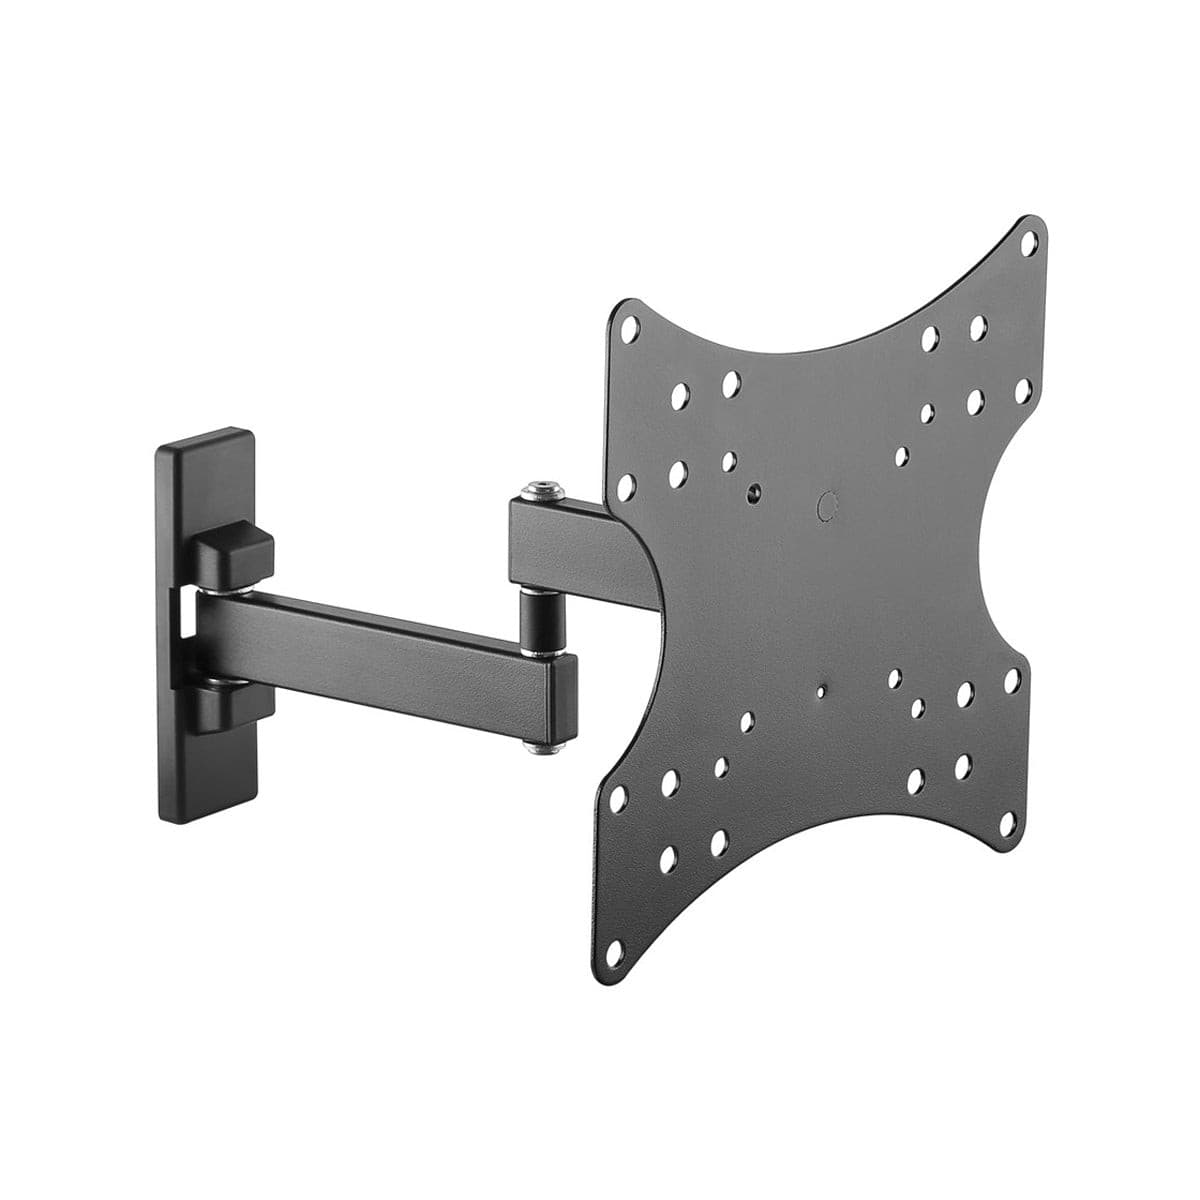 Goobay TV Wall Mount Basic FULLMOTION (S) Fully Movable Double Arm Joint for TVs 23 to 42 inch.